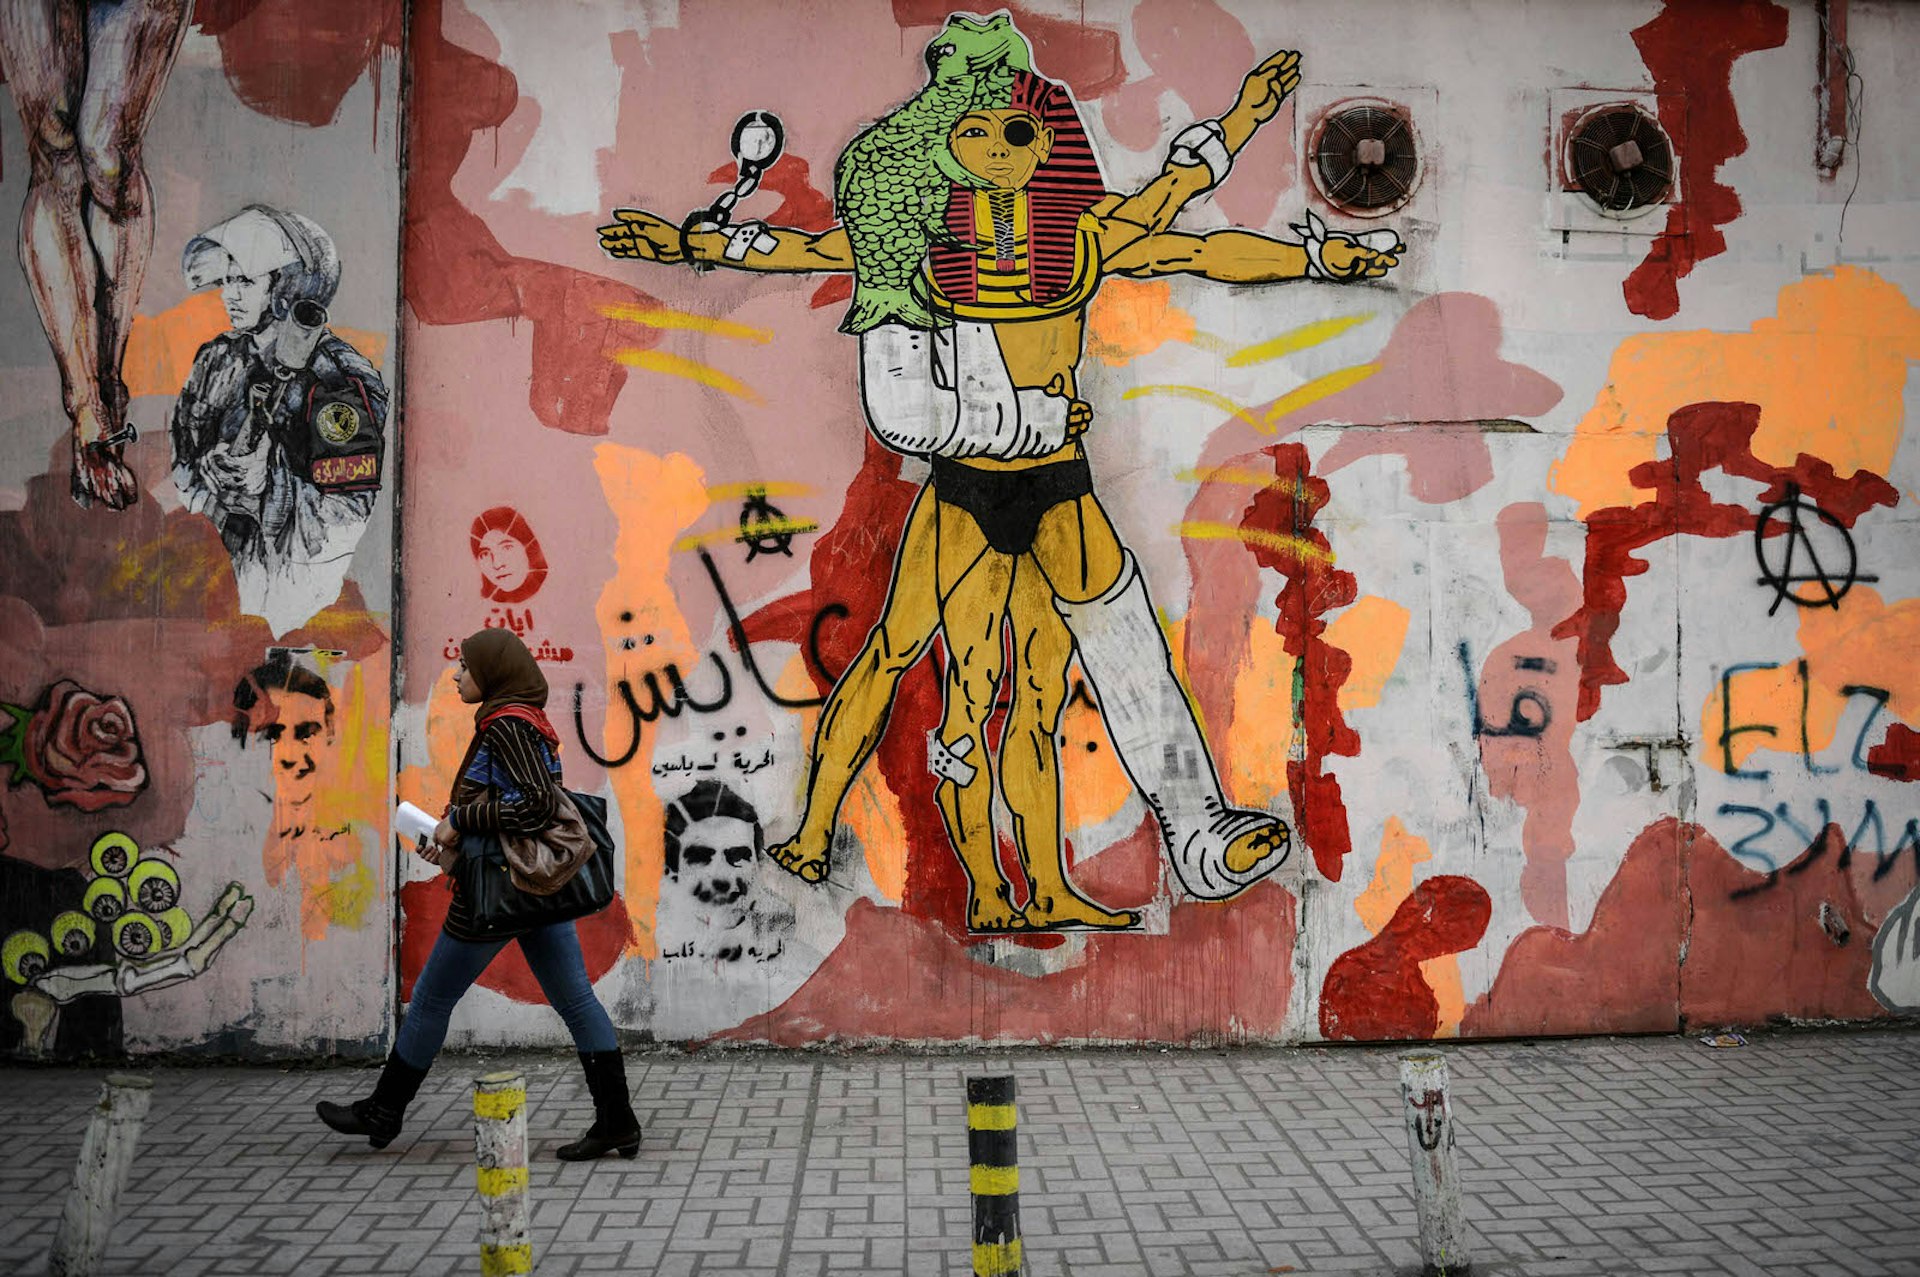 The subject matter of graffiti near Tahrir Sq reflects the city's turbulent recent history. Image by Mohamed Hossam / Anadolu Agency / Getty Images